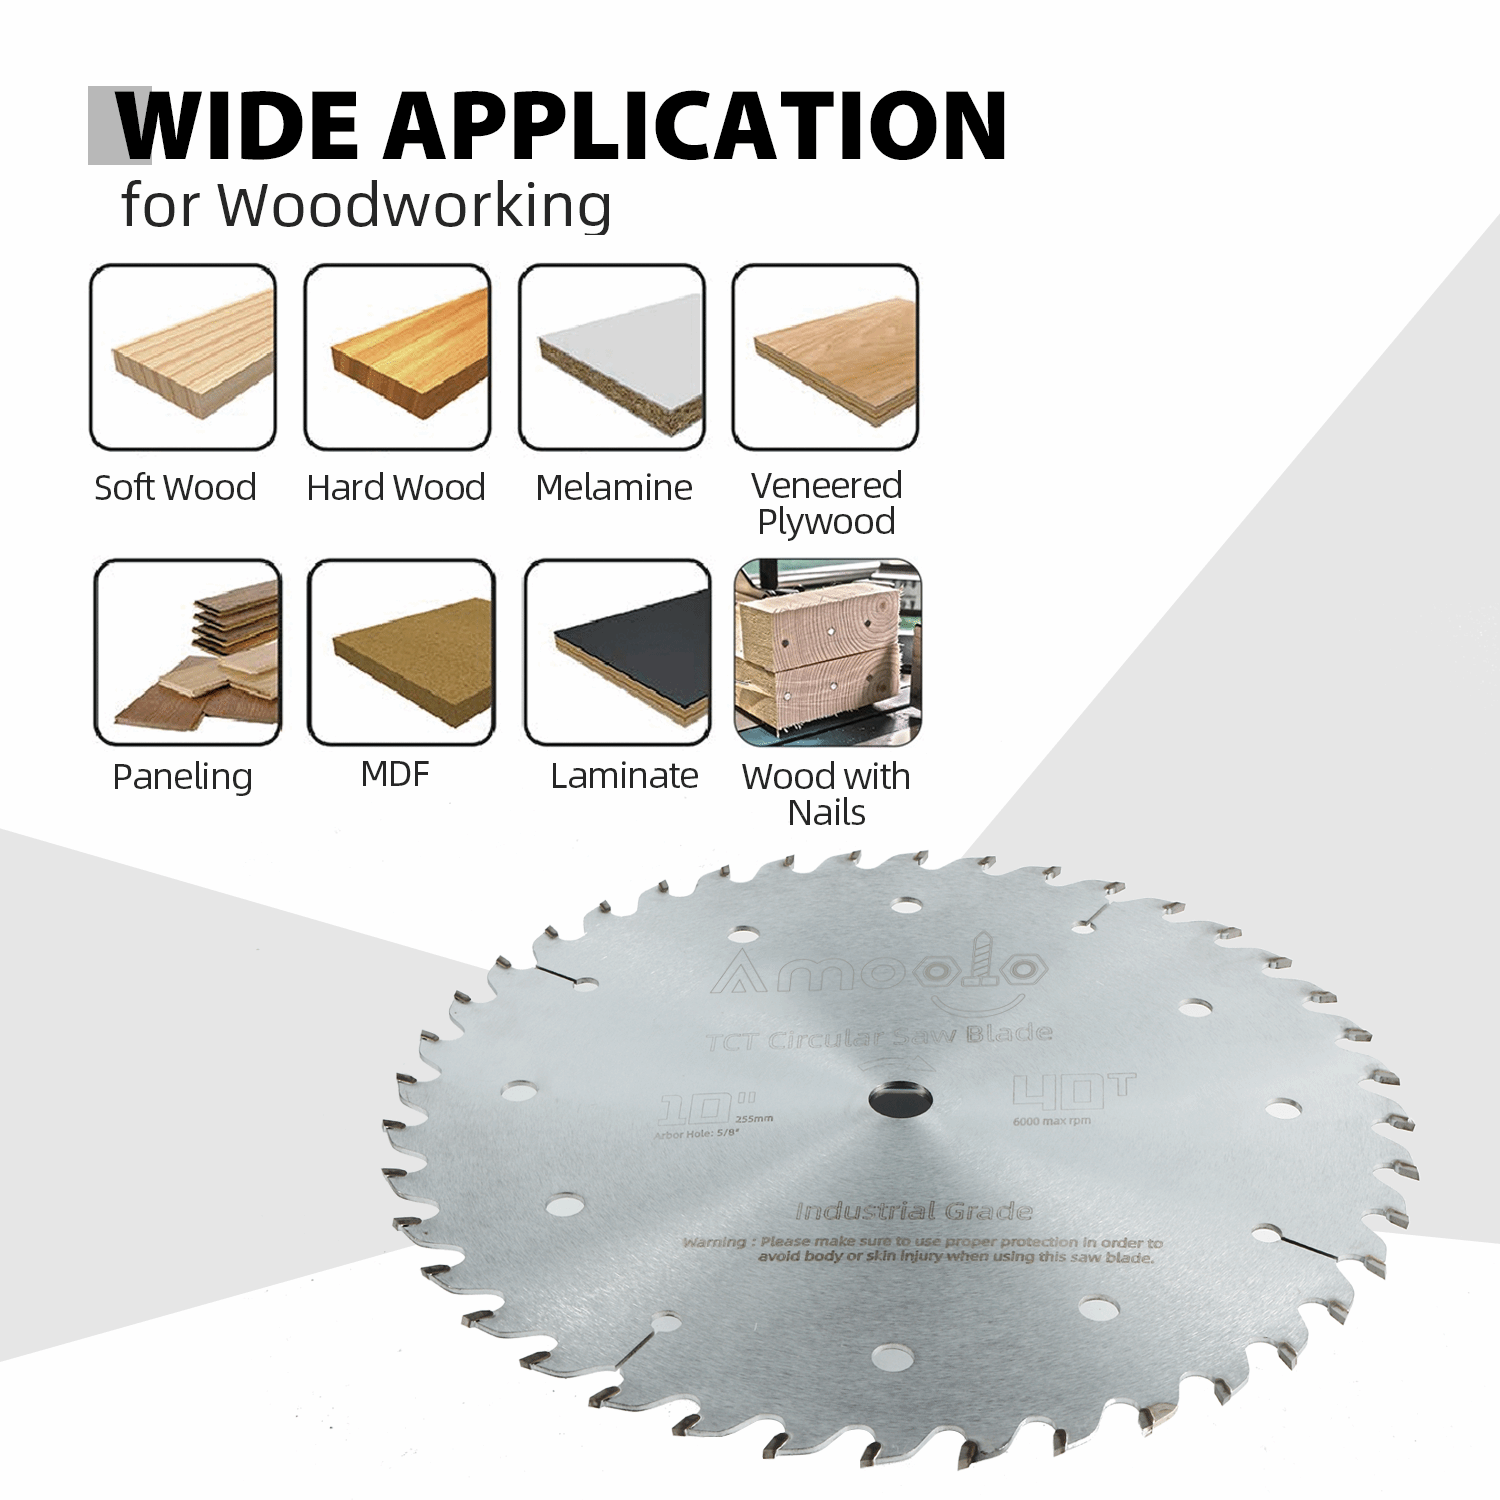 amoolo 10 Inch Apex Circular Saw Blade, Japanese Edge, ATB Teeth, for Cross Cutting, for Wood and Plastic